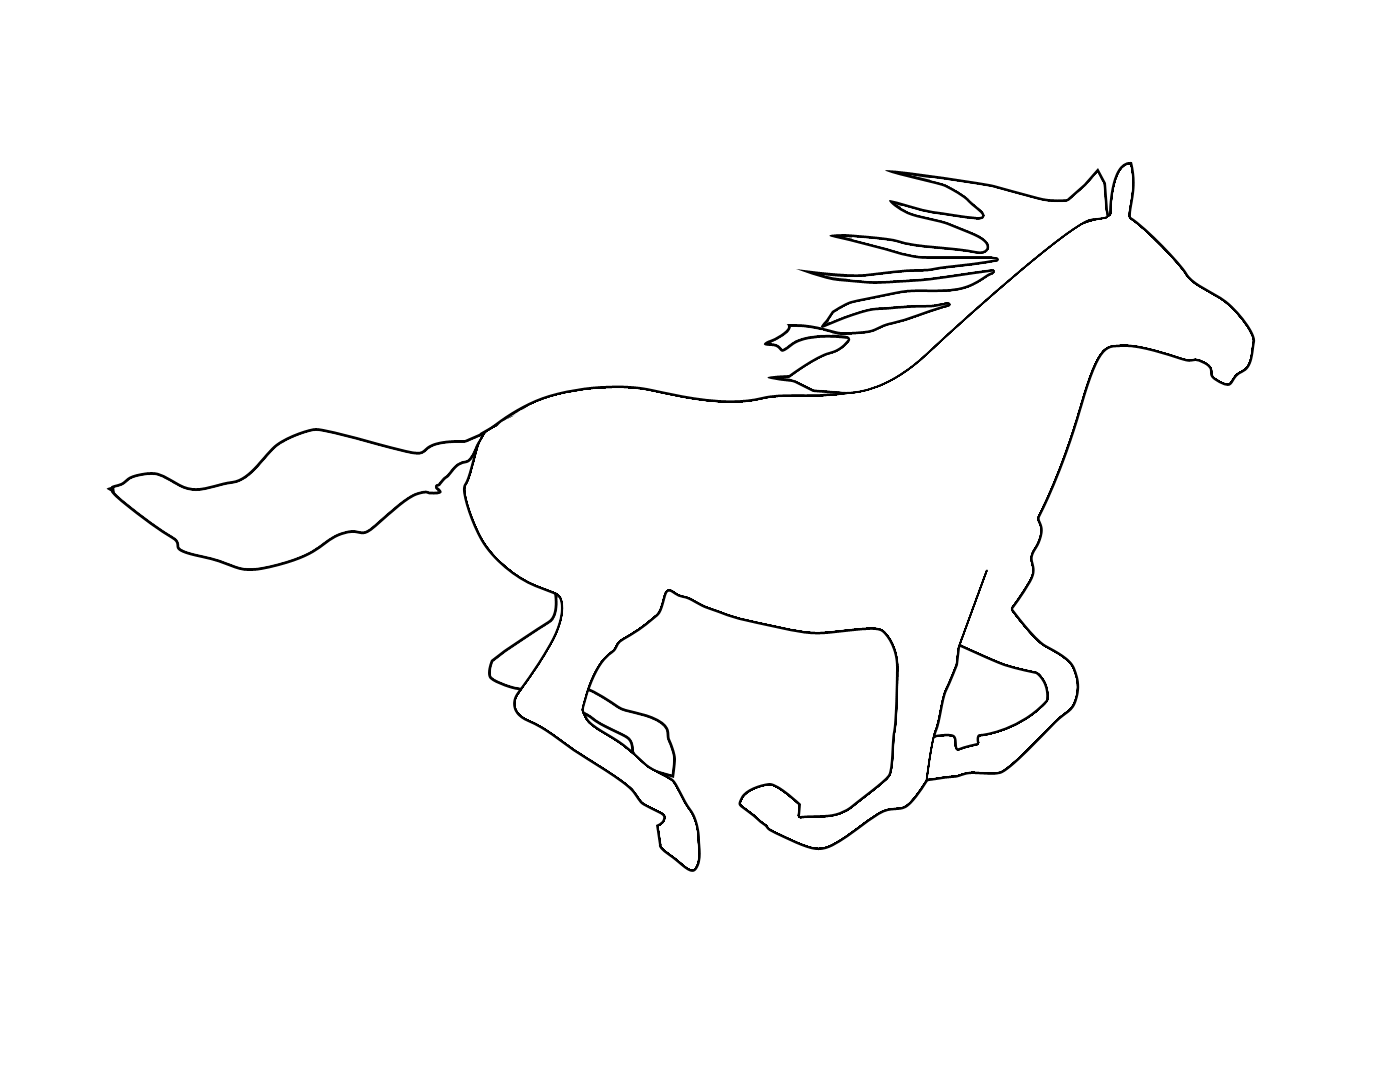 Free Horse Outline, Download Free Horse Outline png images, Free